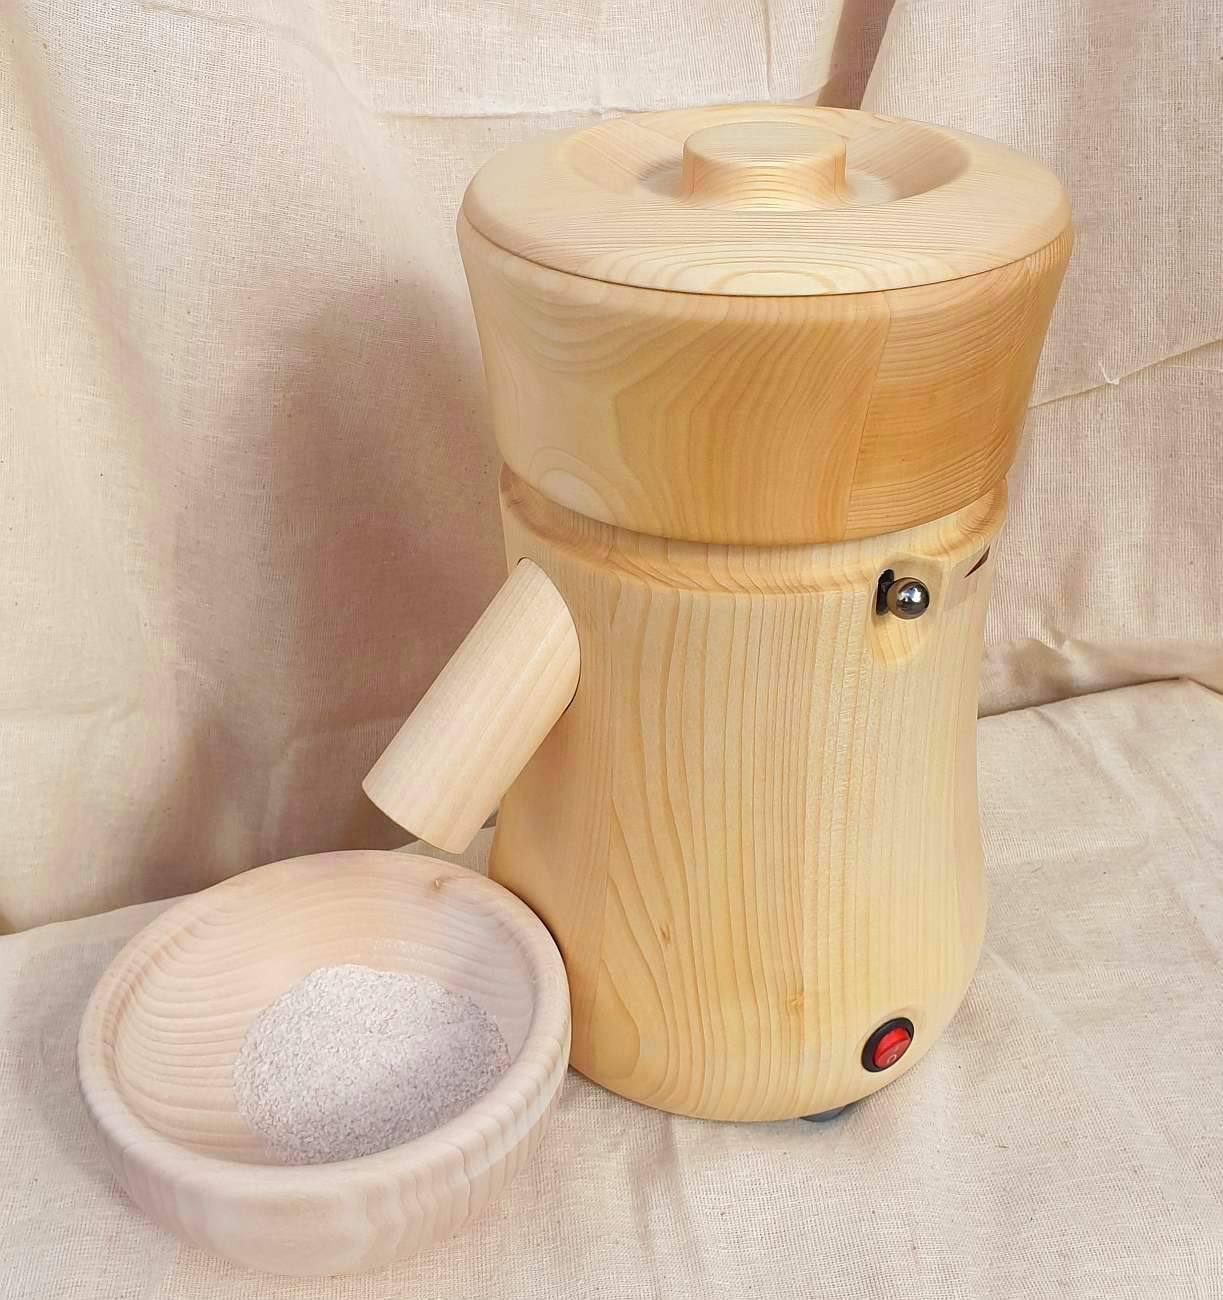 Electric Grinder, Small Electric Grain Mill for Home